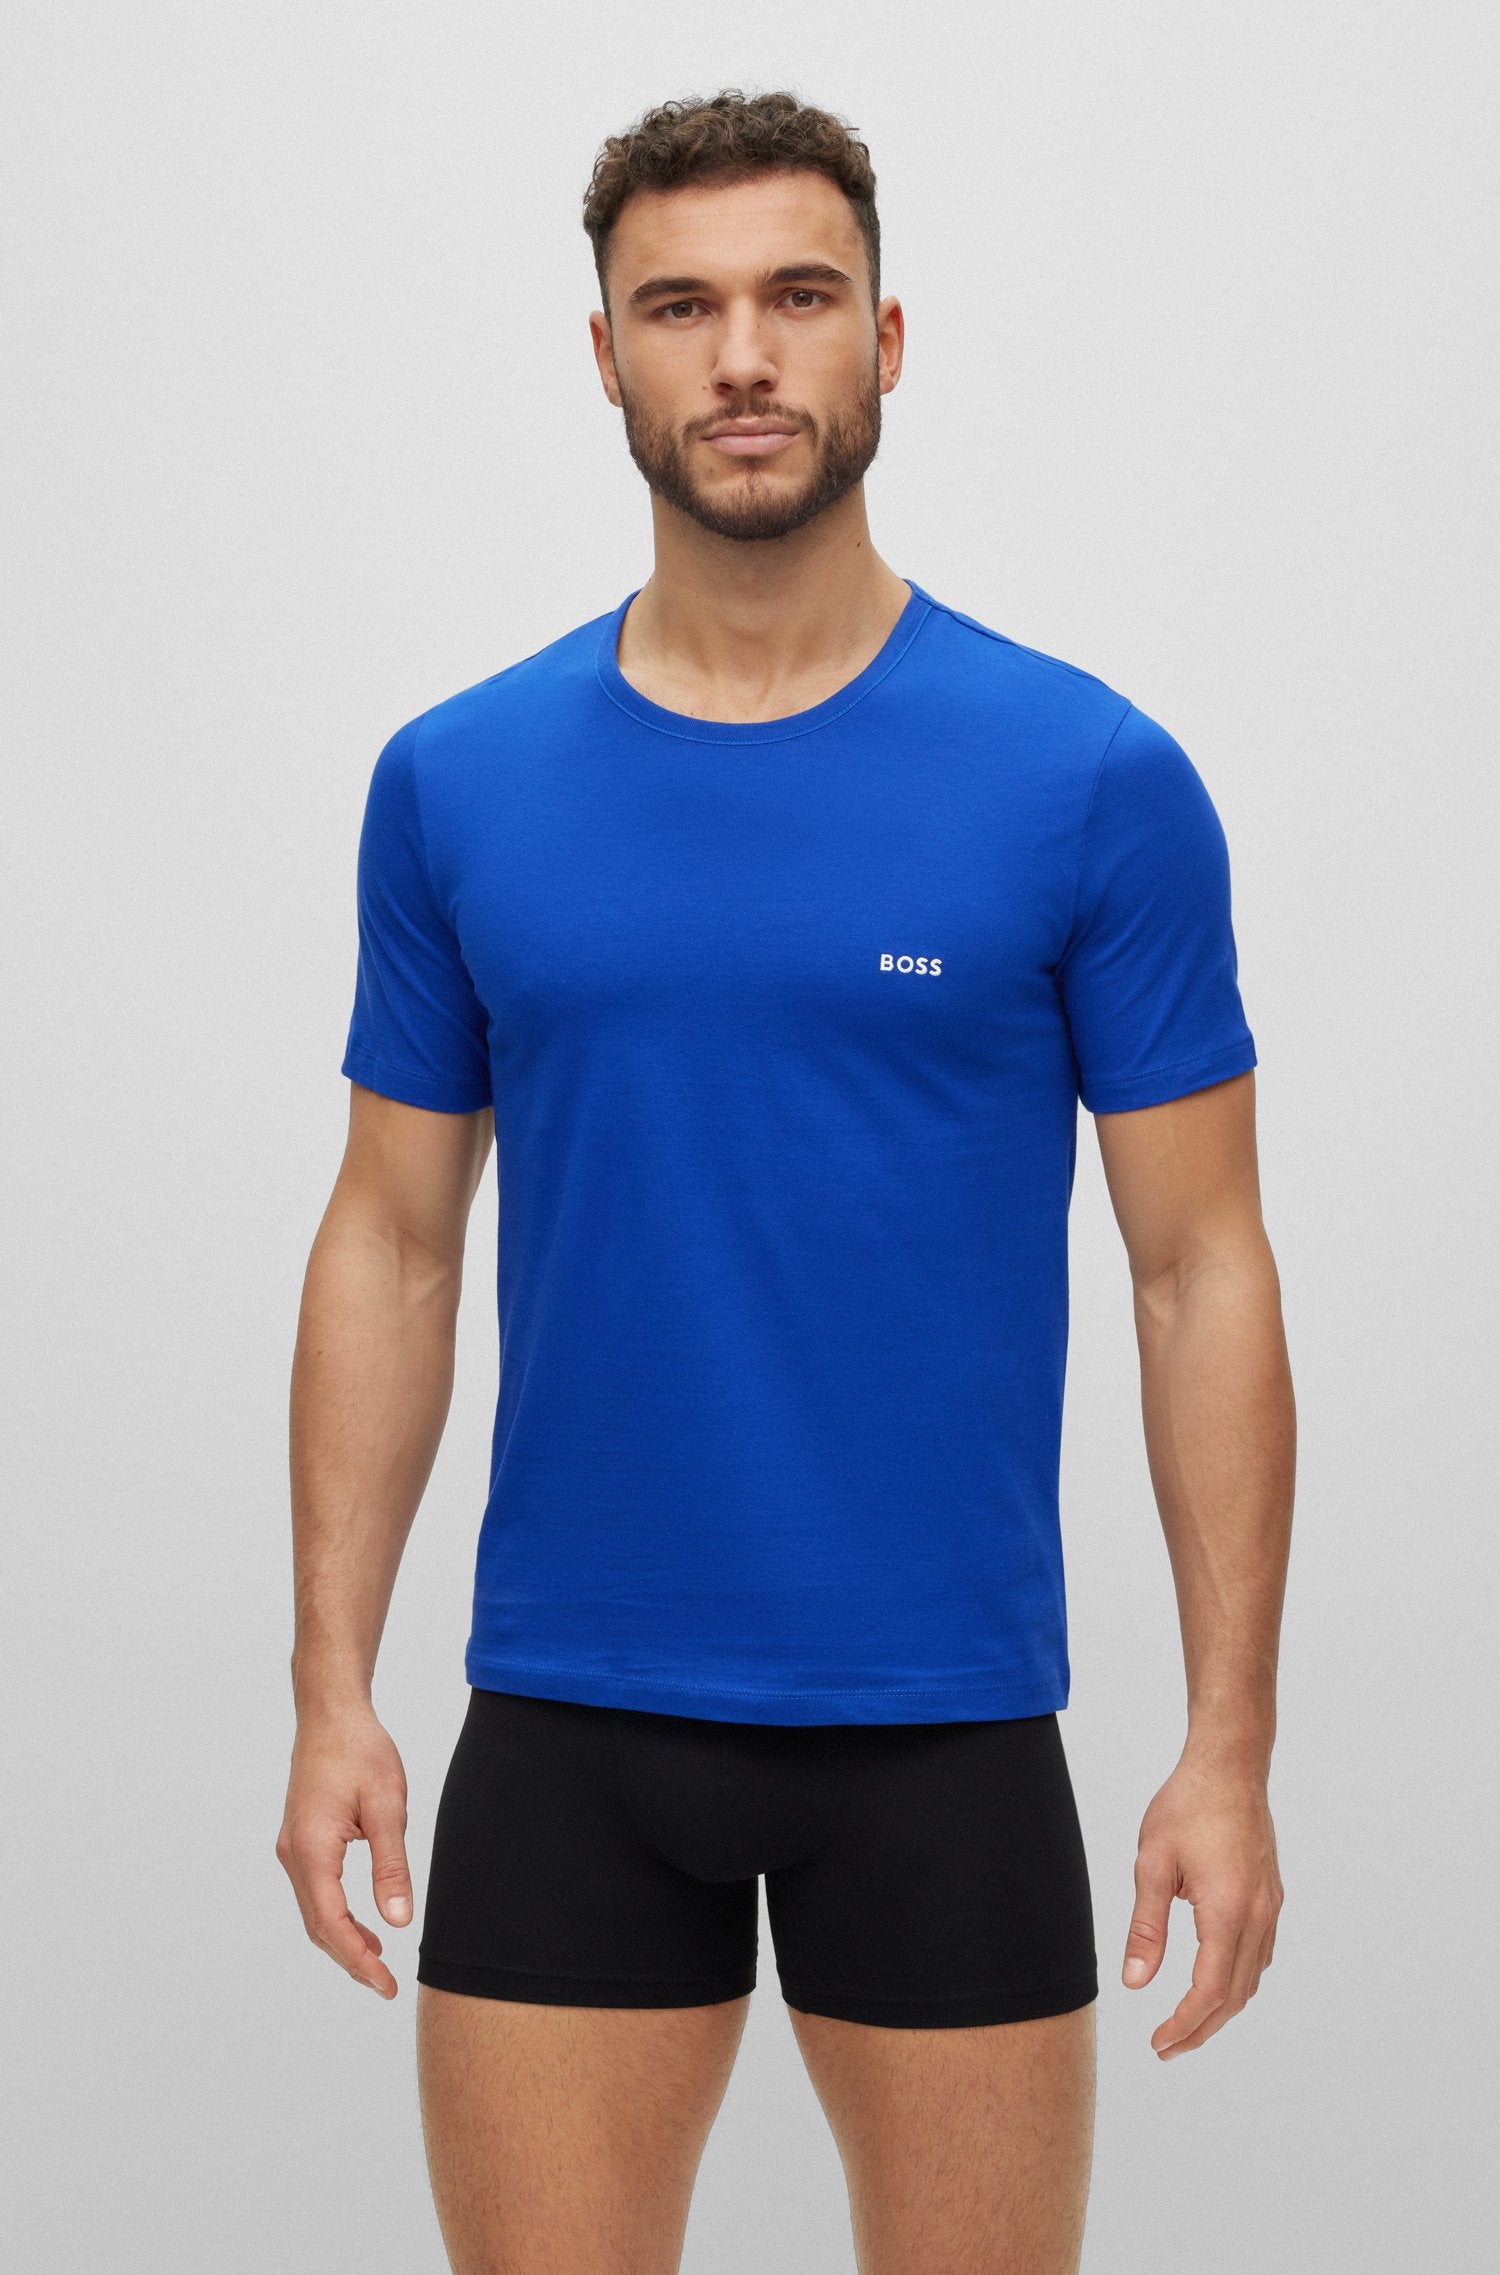 BOSS - 3-Pack Of T-Shirts In Jersey Cotton In Open Blue, Navy and Black 50475286 460